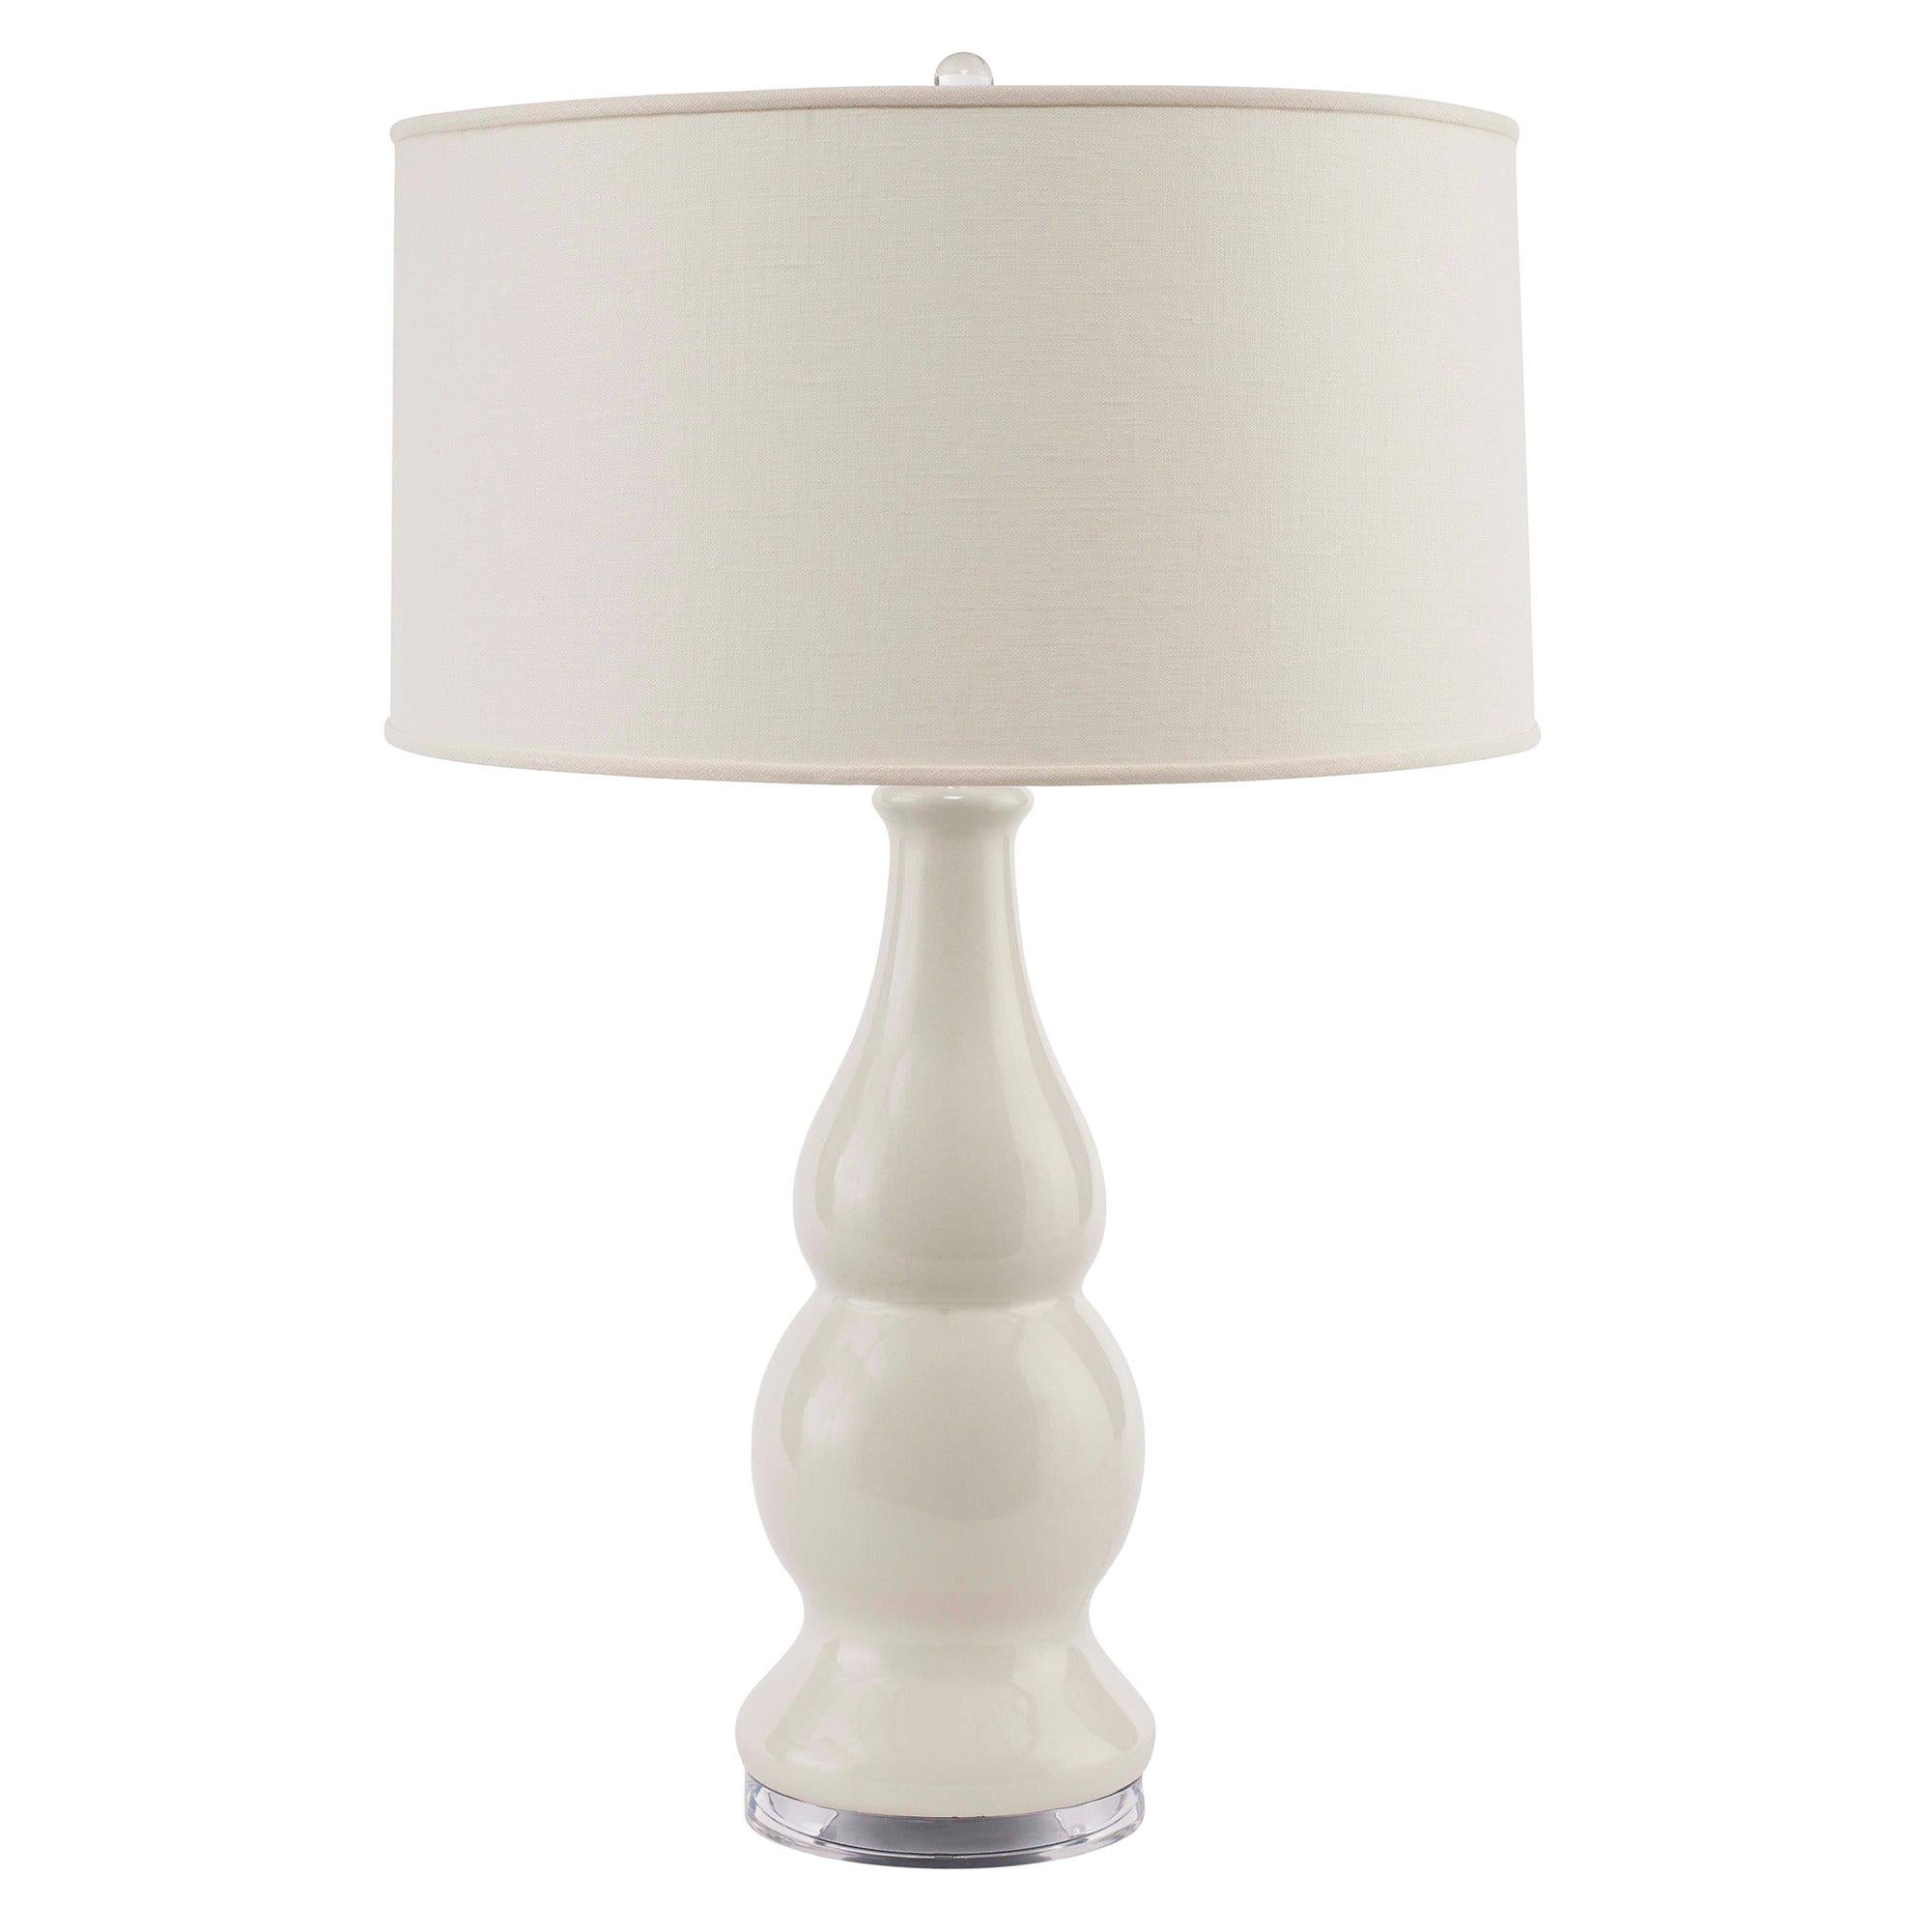 Jackson Table Lamp in Ivory Ceramic by CuratedKravet